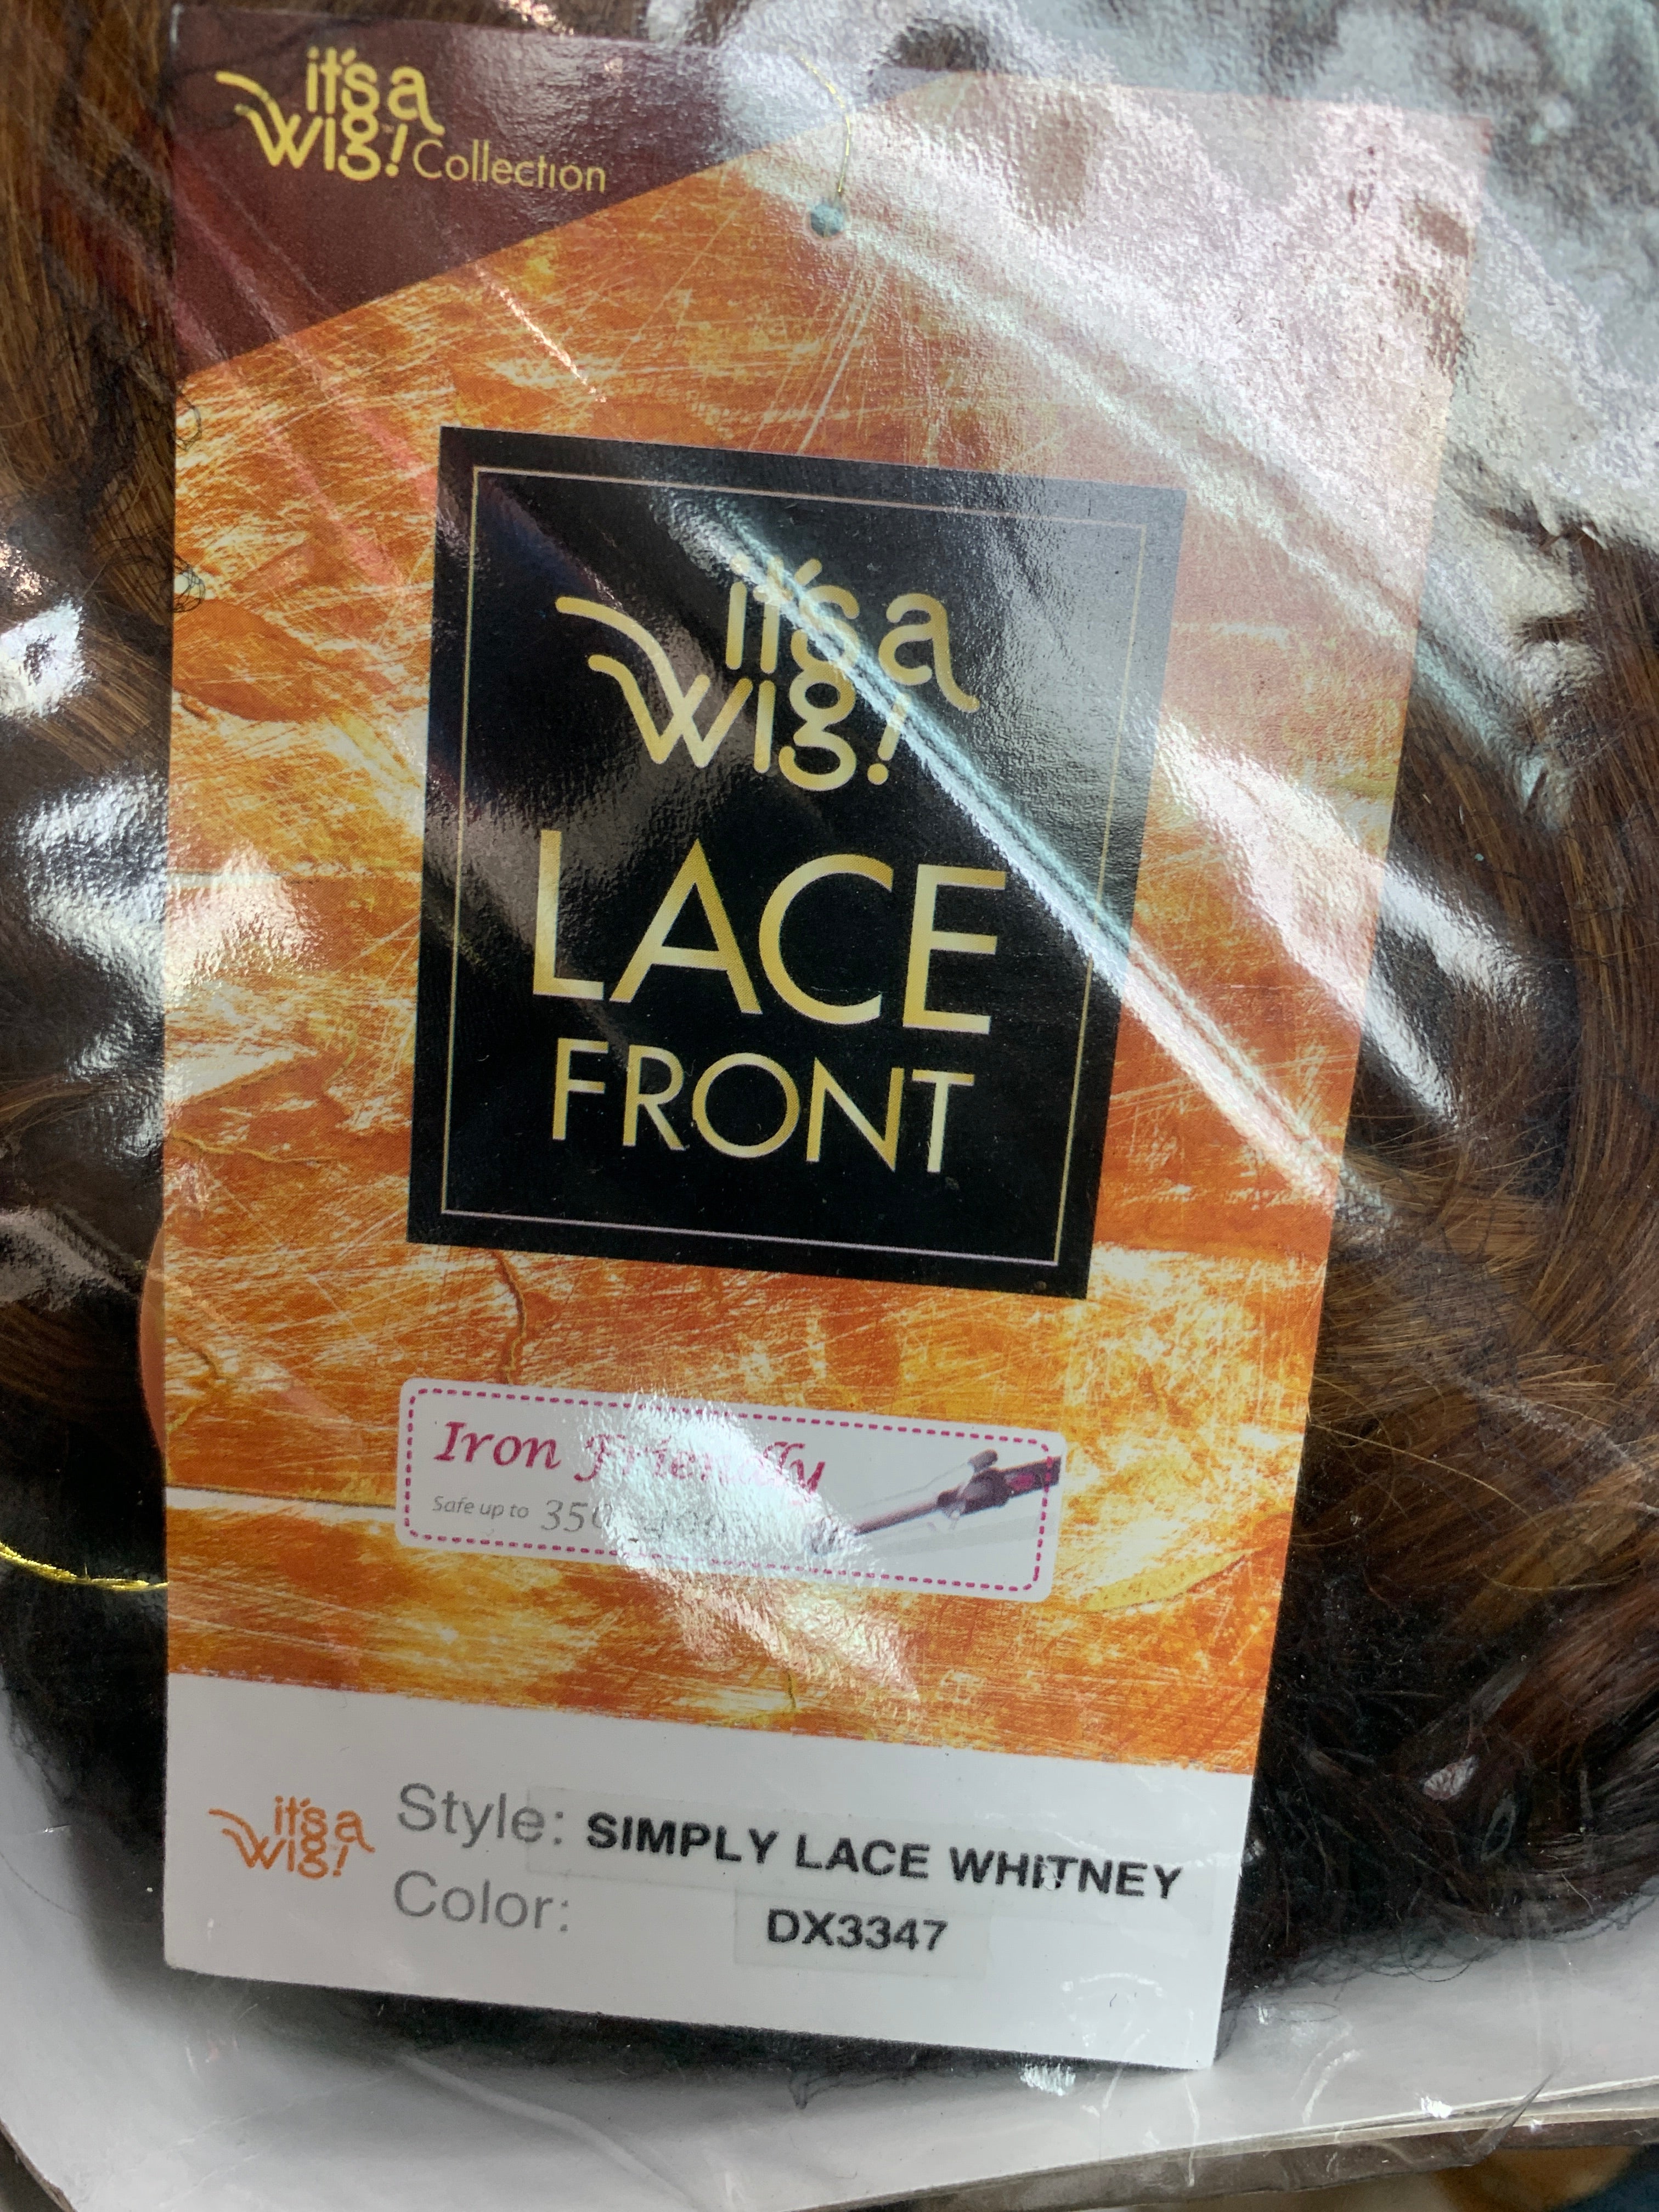 It’s a wig simply lace whitney